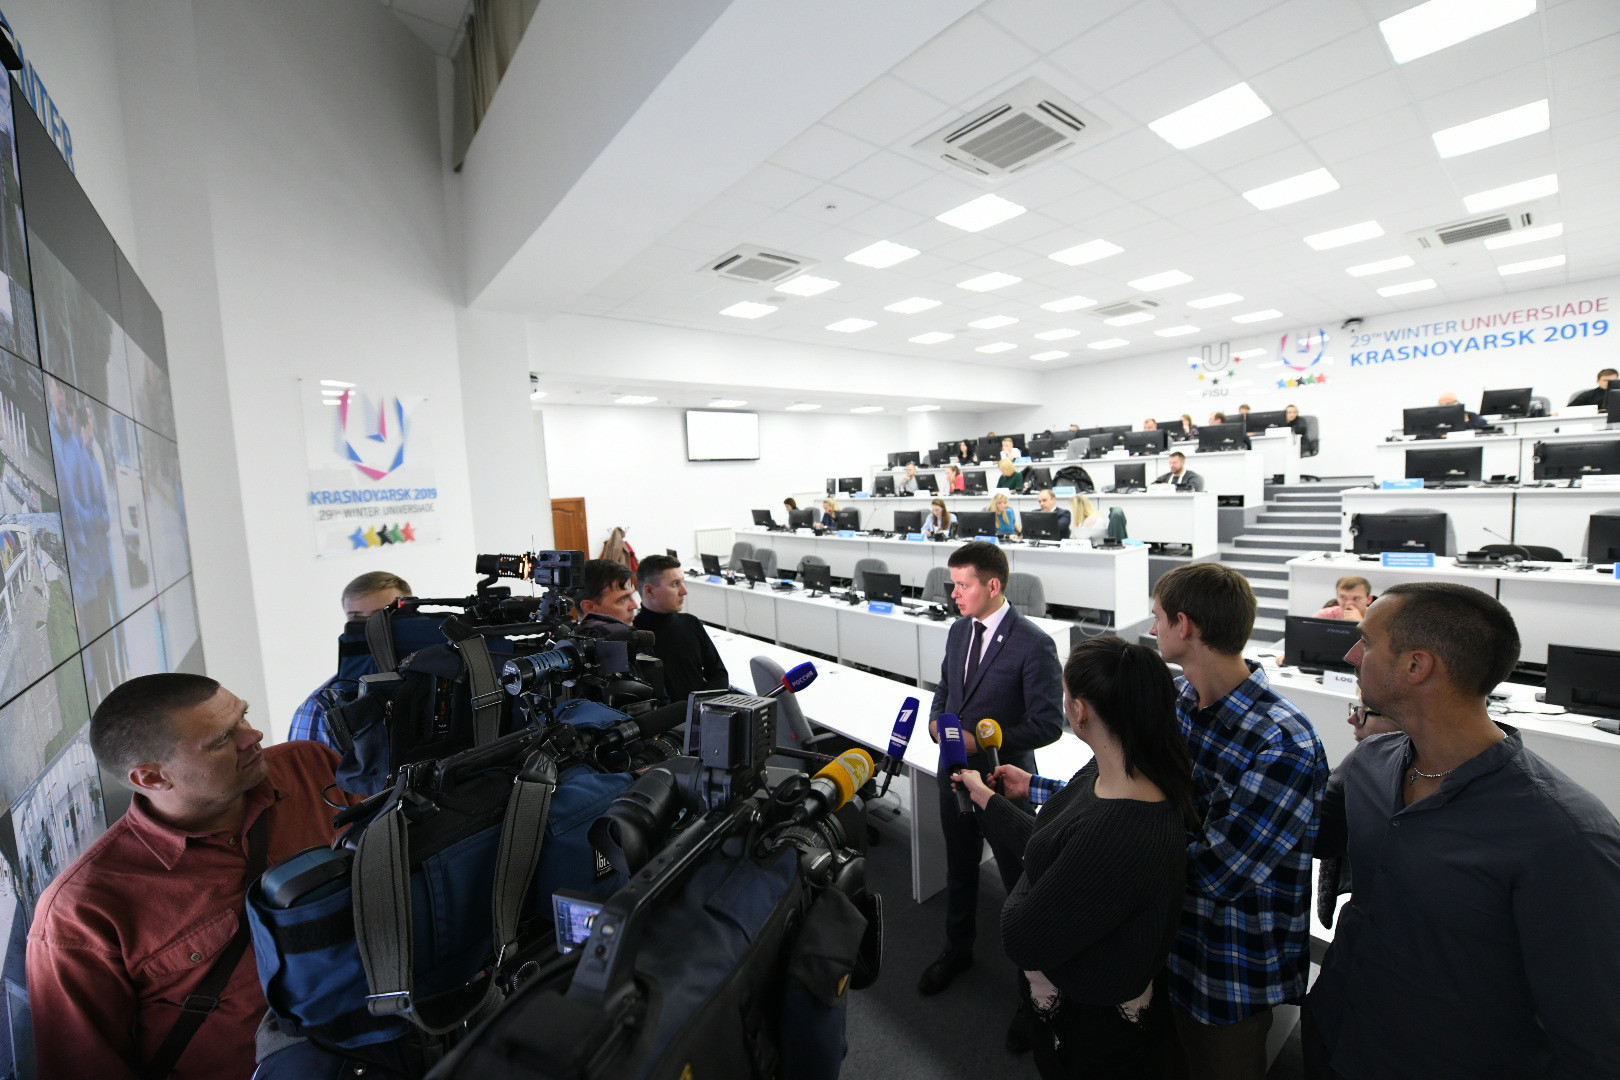 The Centre, which features a wall of TV screens to monitor athletes and fans, is at the Siberian Federal University ©Krasnoyarsk 2019 